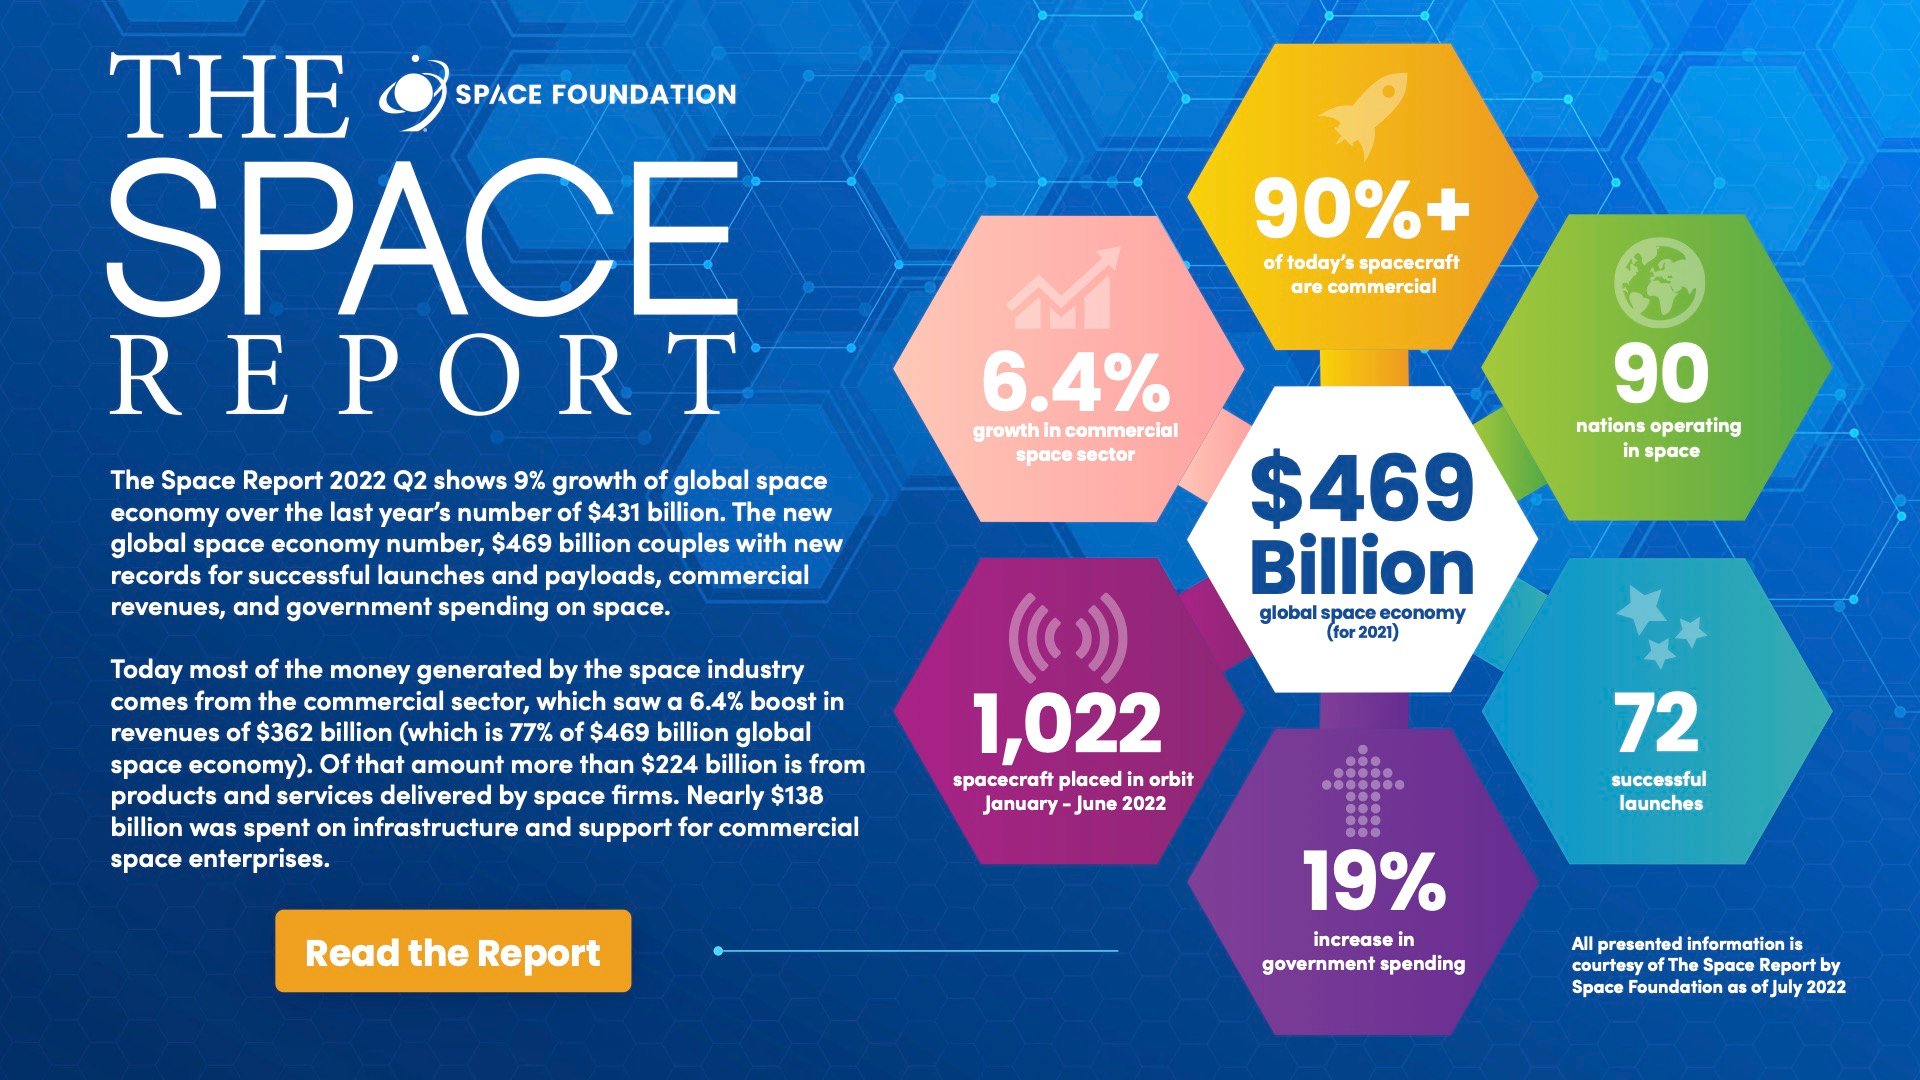 Space Foundation Releases The Space Report 2022 Q2 Showing Growth of